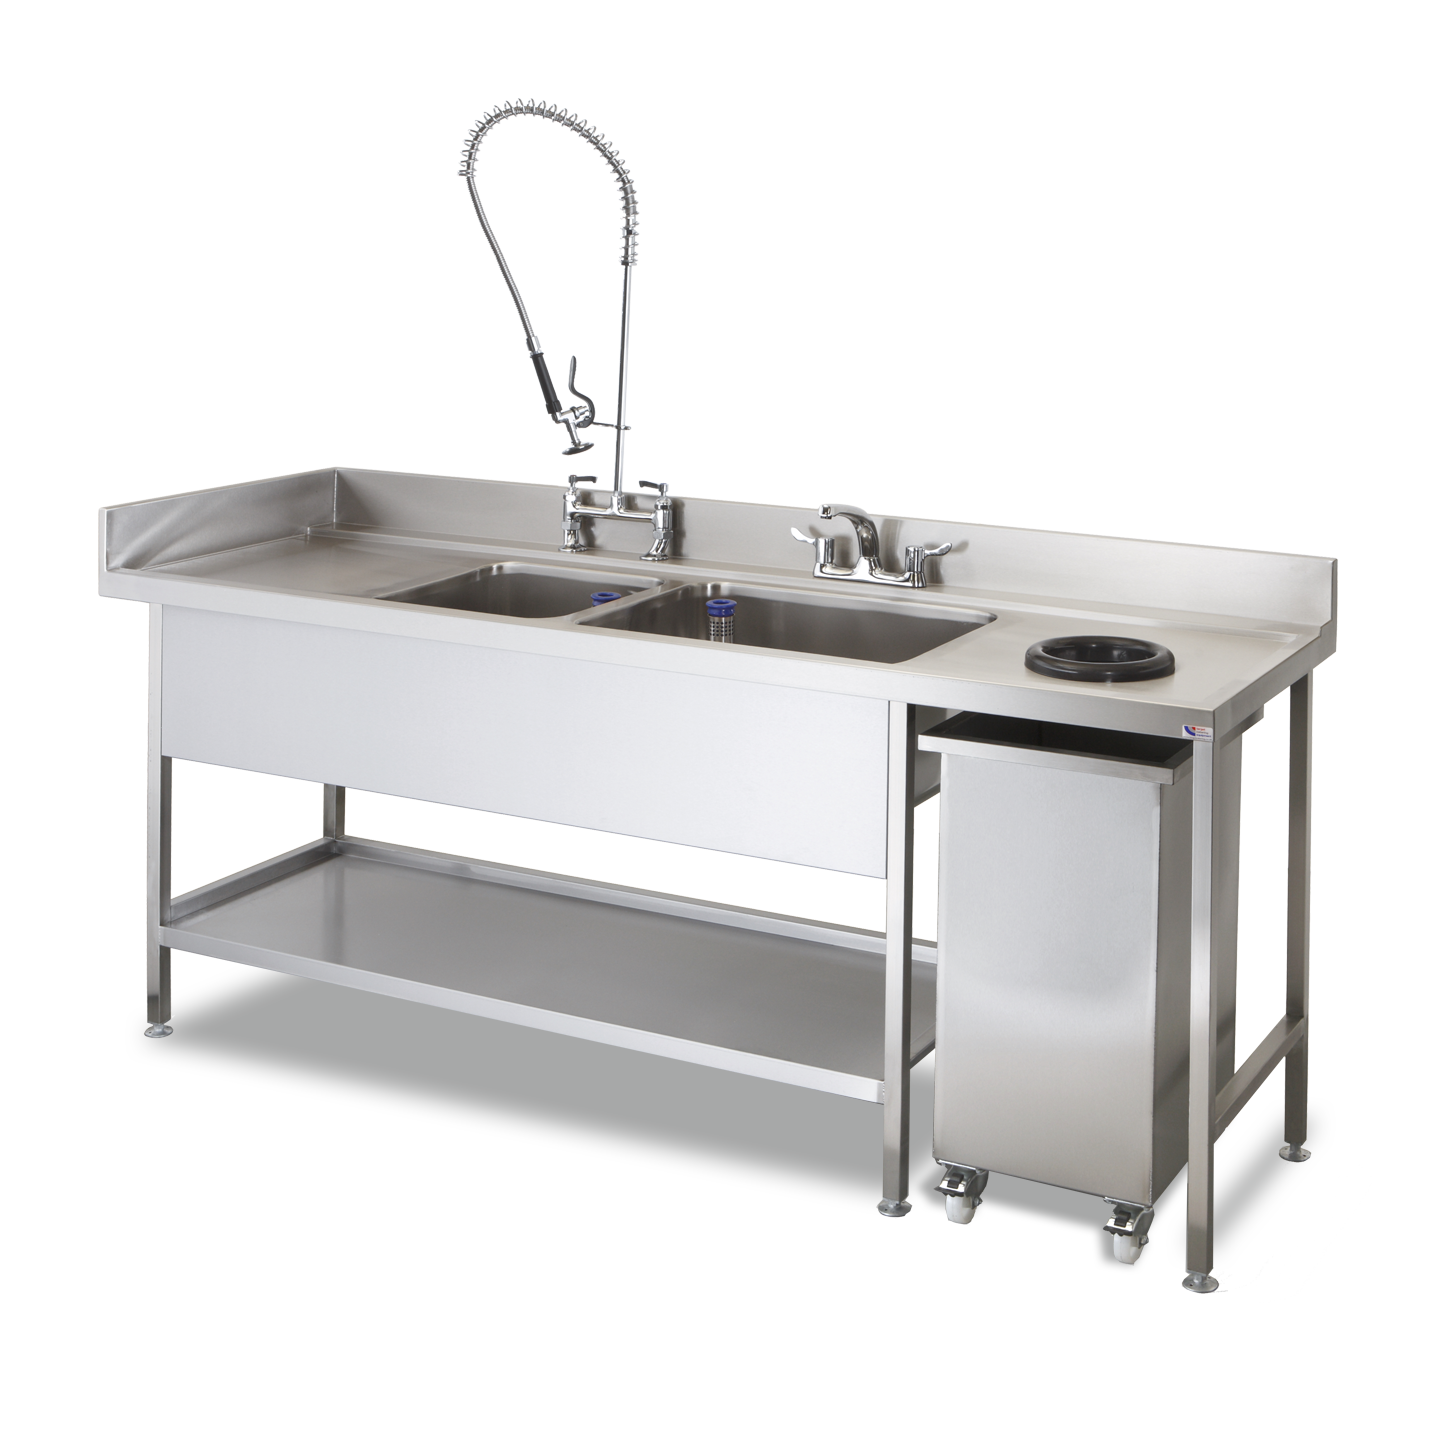 Commercial Stainless Steel Sink - Bespoke Double Bowl Sink with Prewash Spray Arm, Scrap Chute and Bin Under